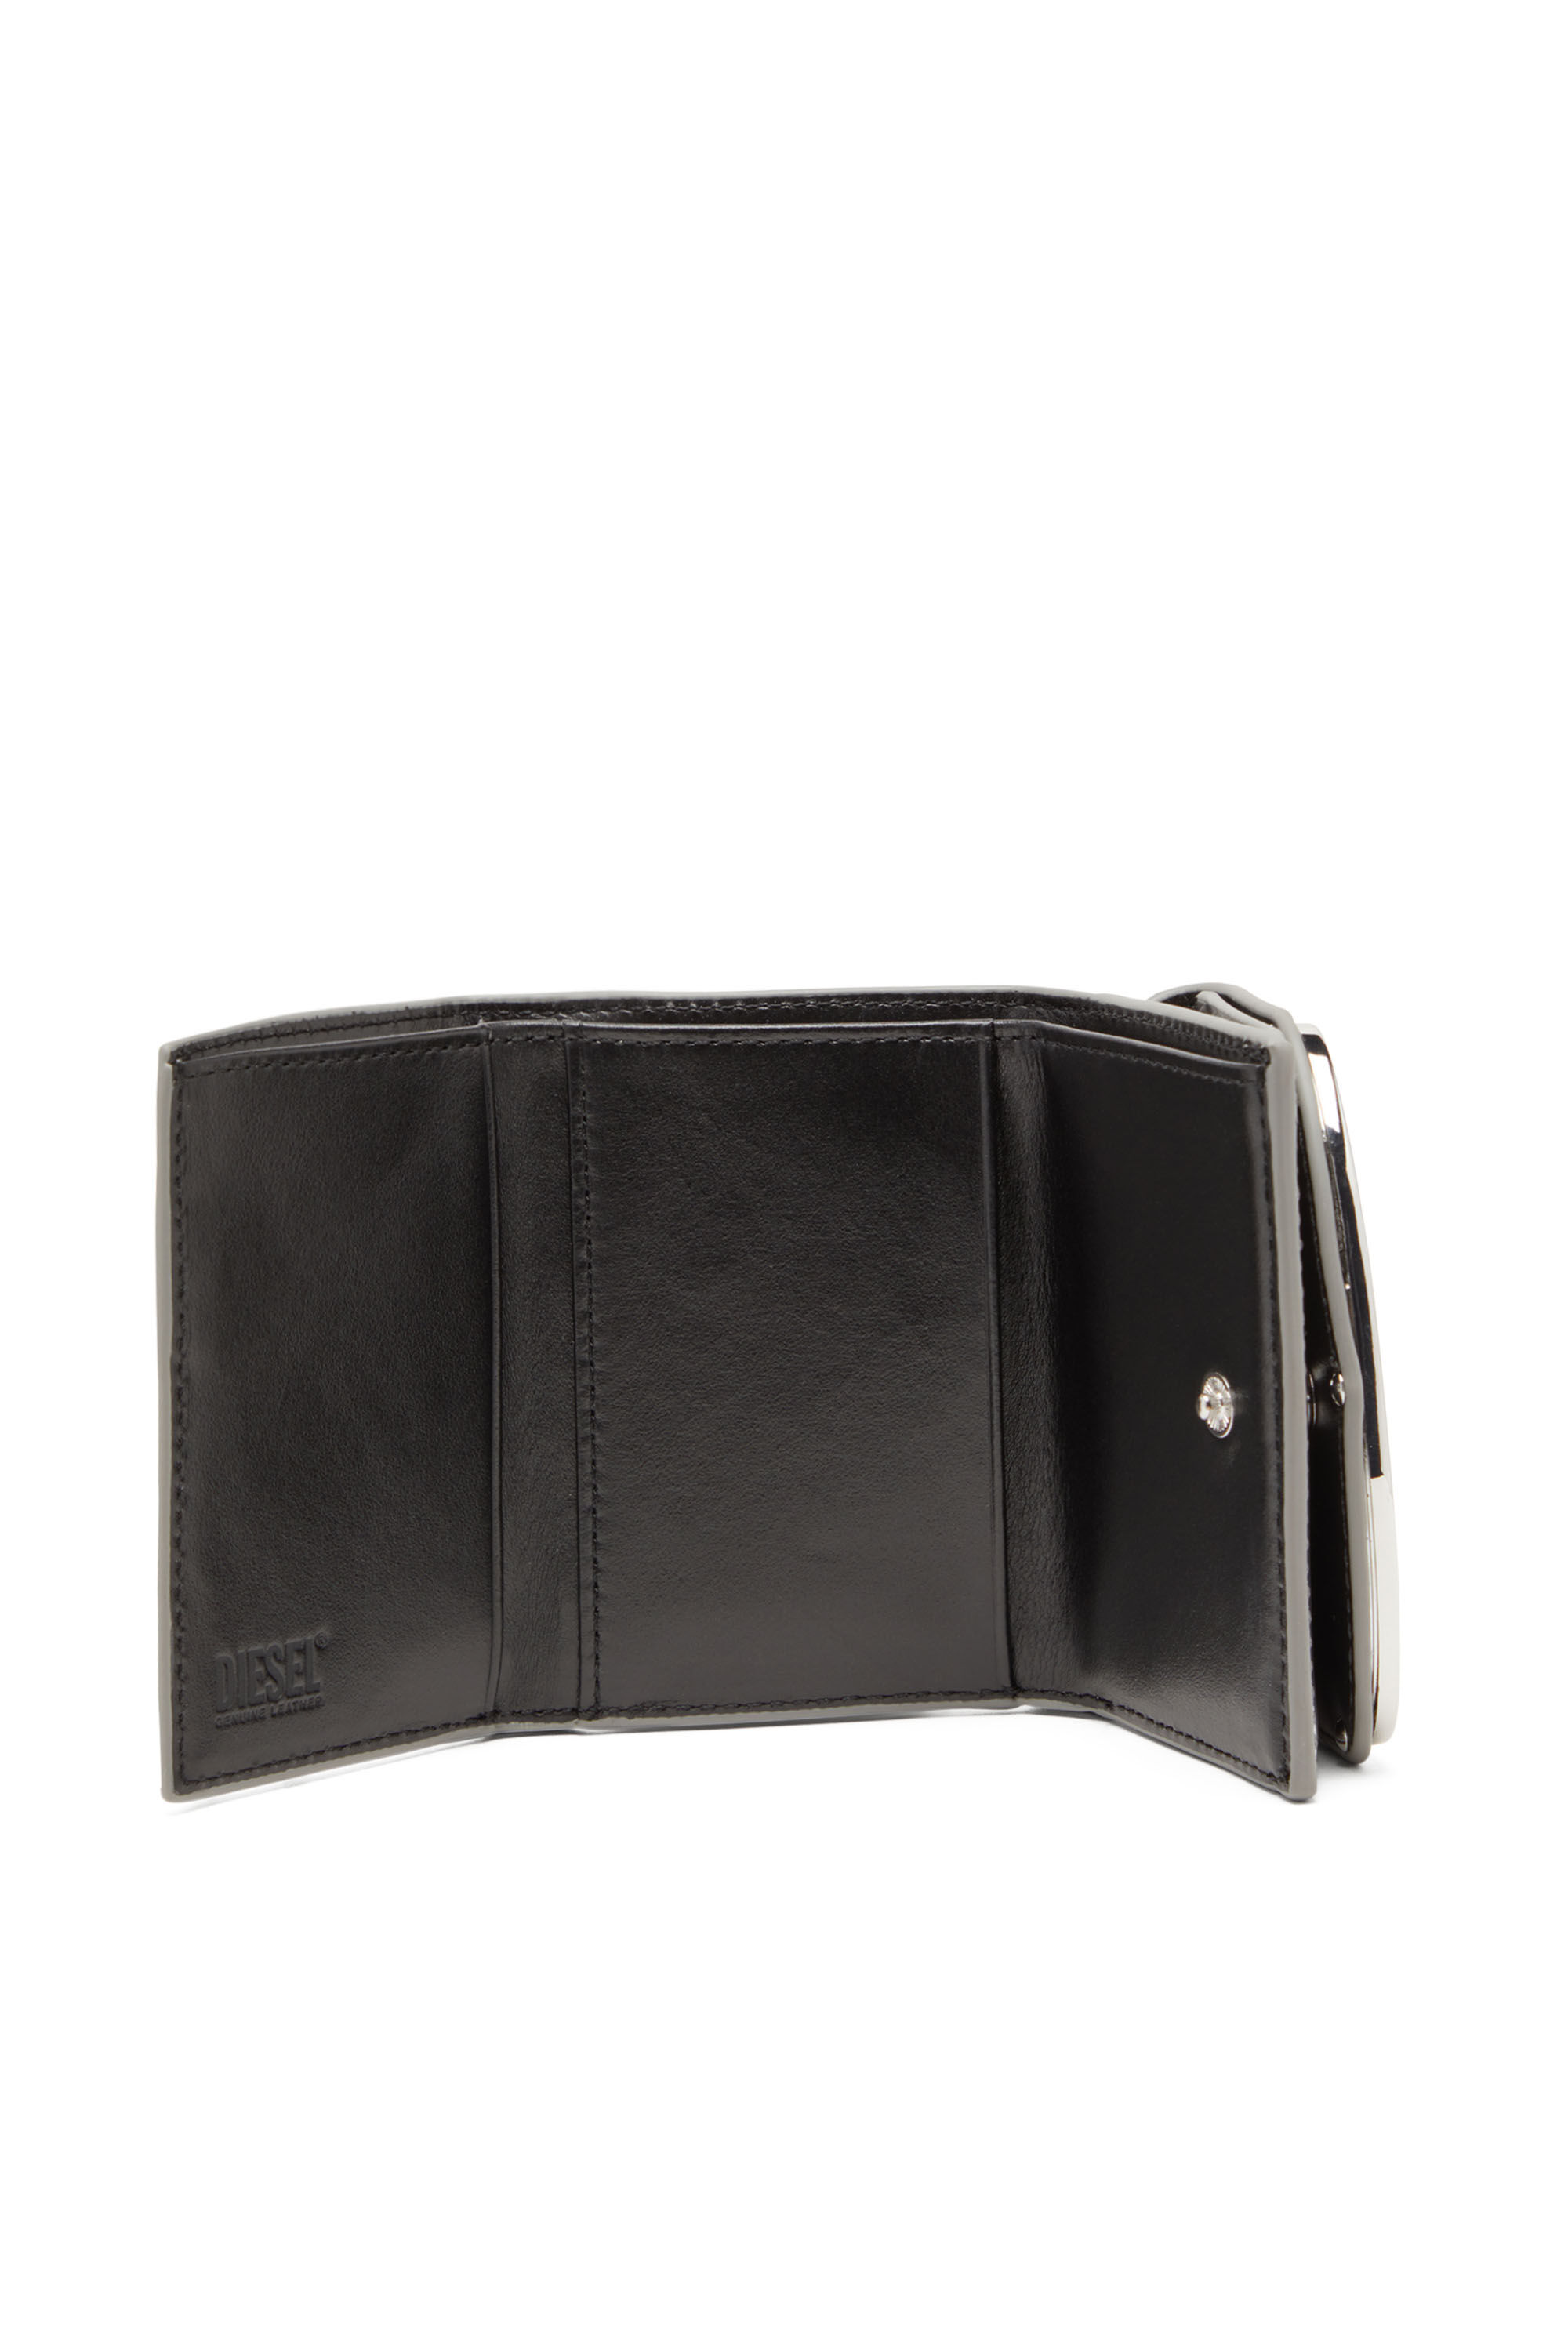 Diesel - 1DR TRI FOLD COIN XS II, Female Tri-fold wallet in mirrored leather in シルバー - Image 3